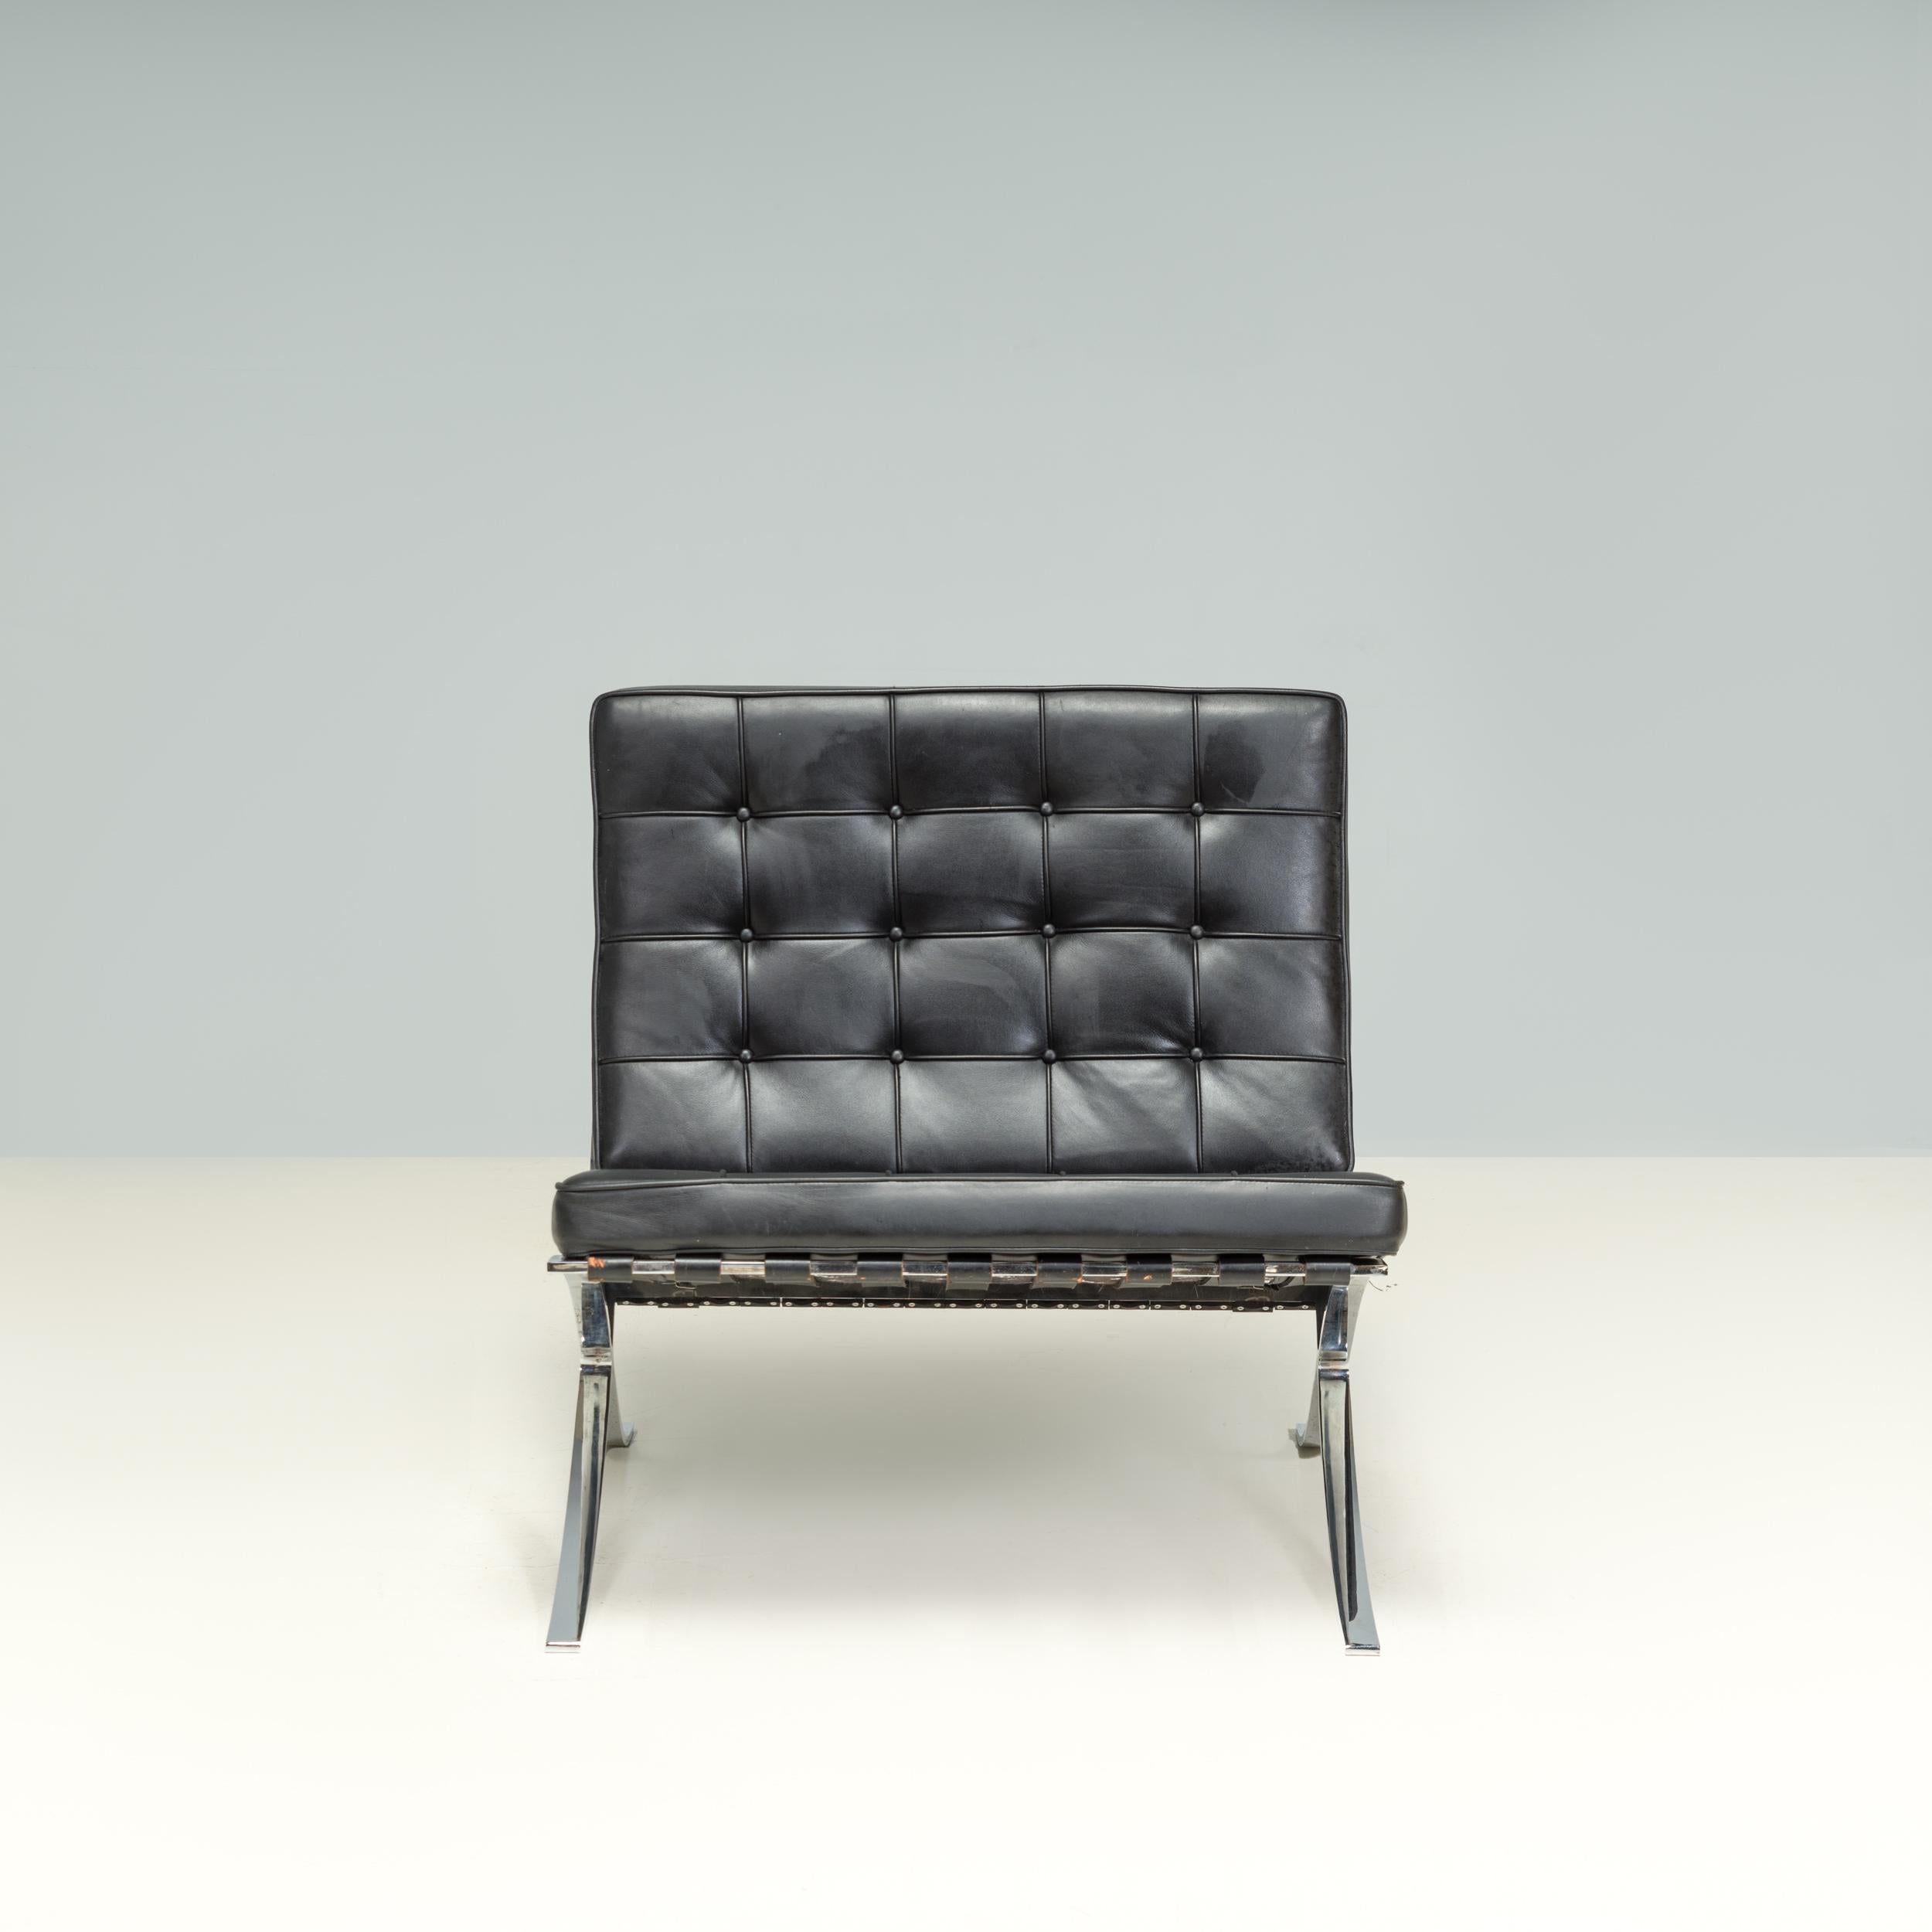 Originally designed by Ludwig Mies Van der Rohe and Lilly Reich in 1925 and introduced at the Internal Exposition hosted in Barcelona in 1929, the Barcelona chair has since become one of the most iconic designs of the 20th century.

Produced by